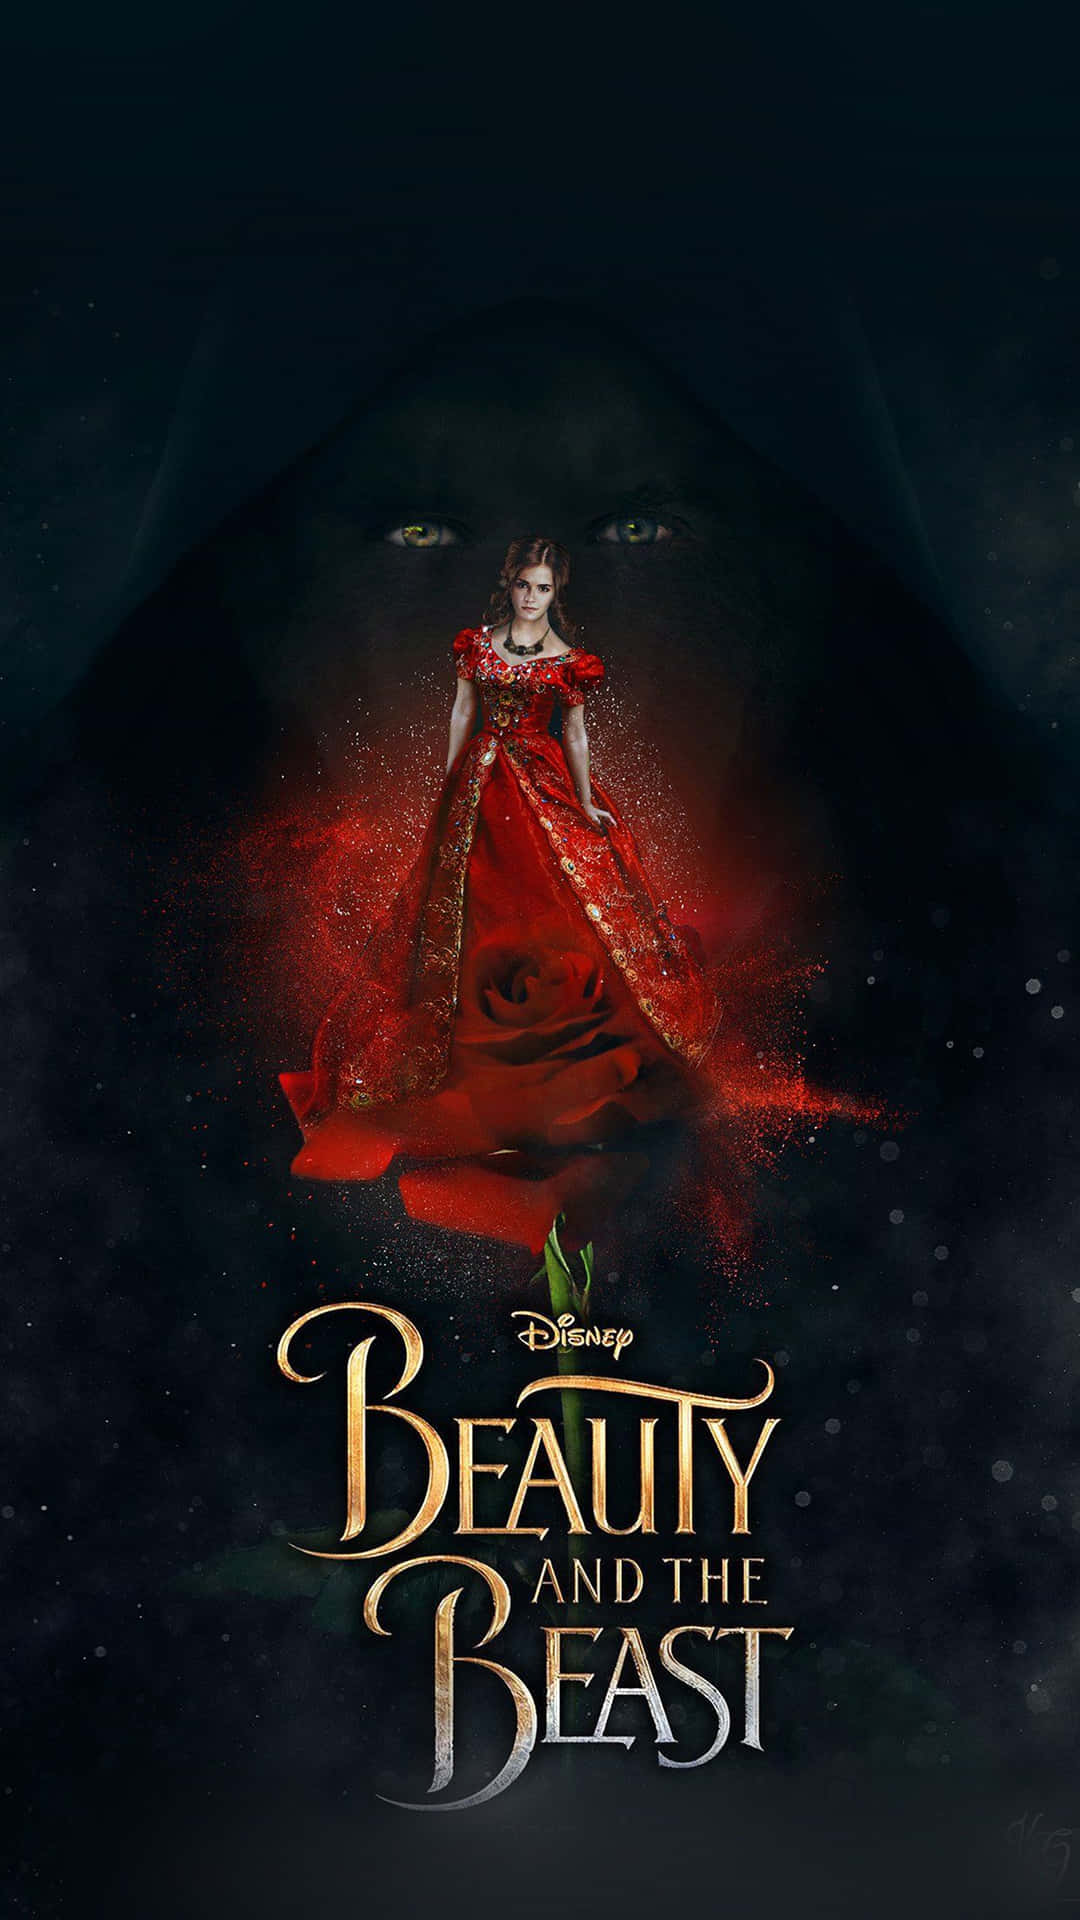 Iphone 7 Disney Beauty And The Beast Wallpaper